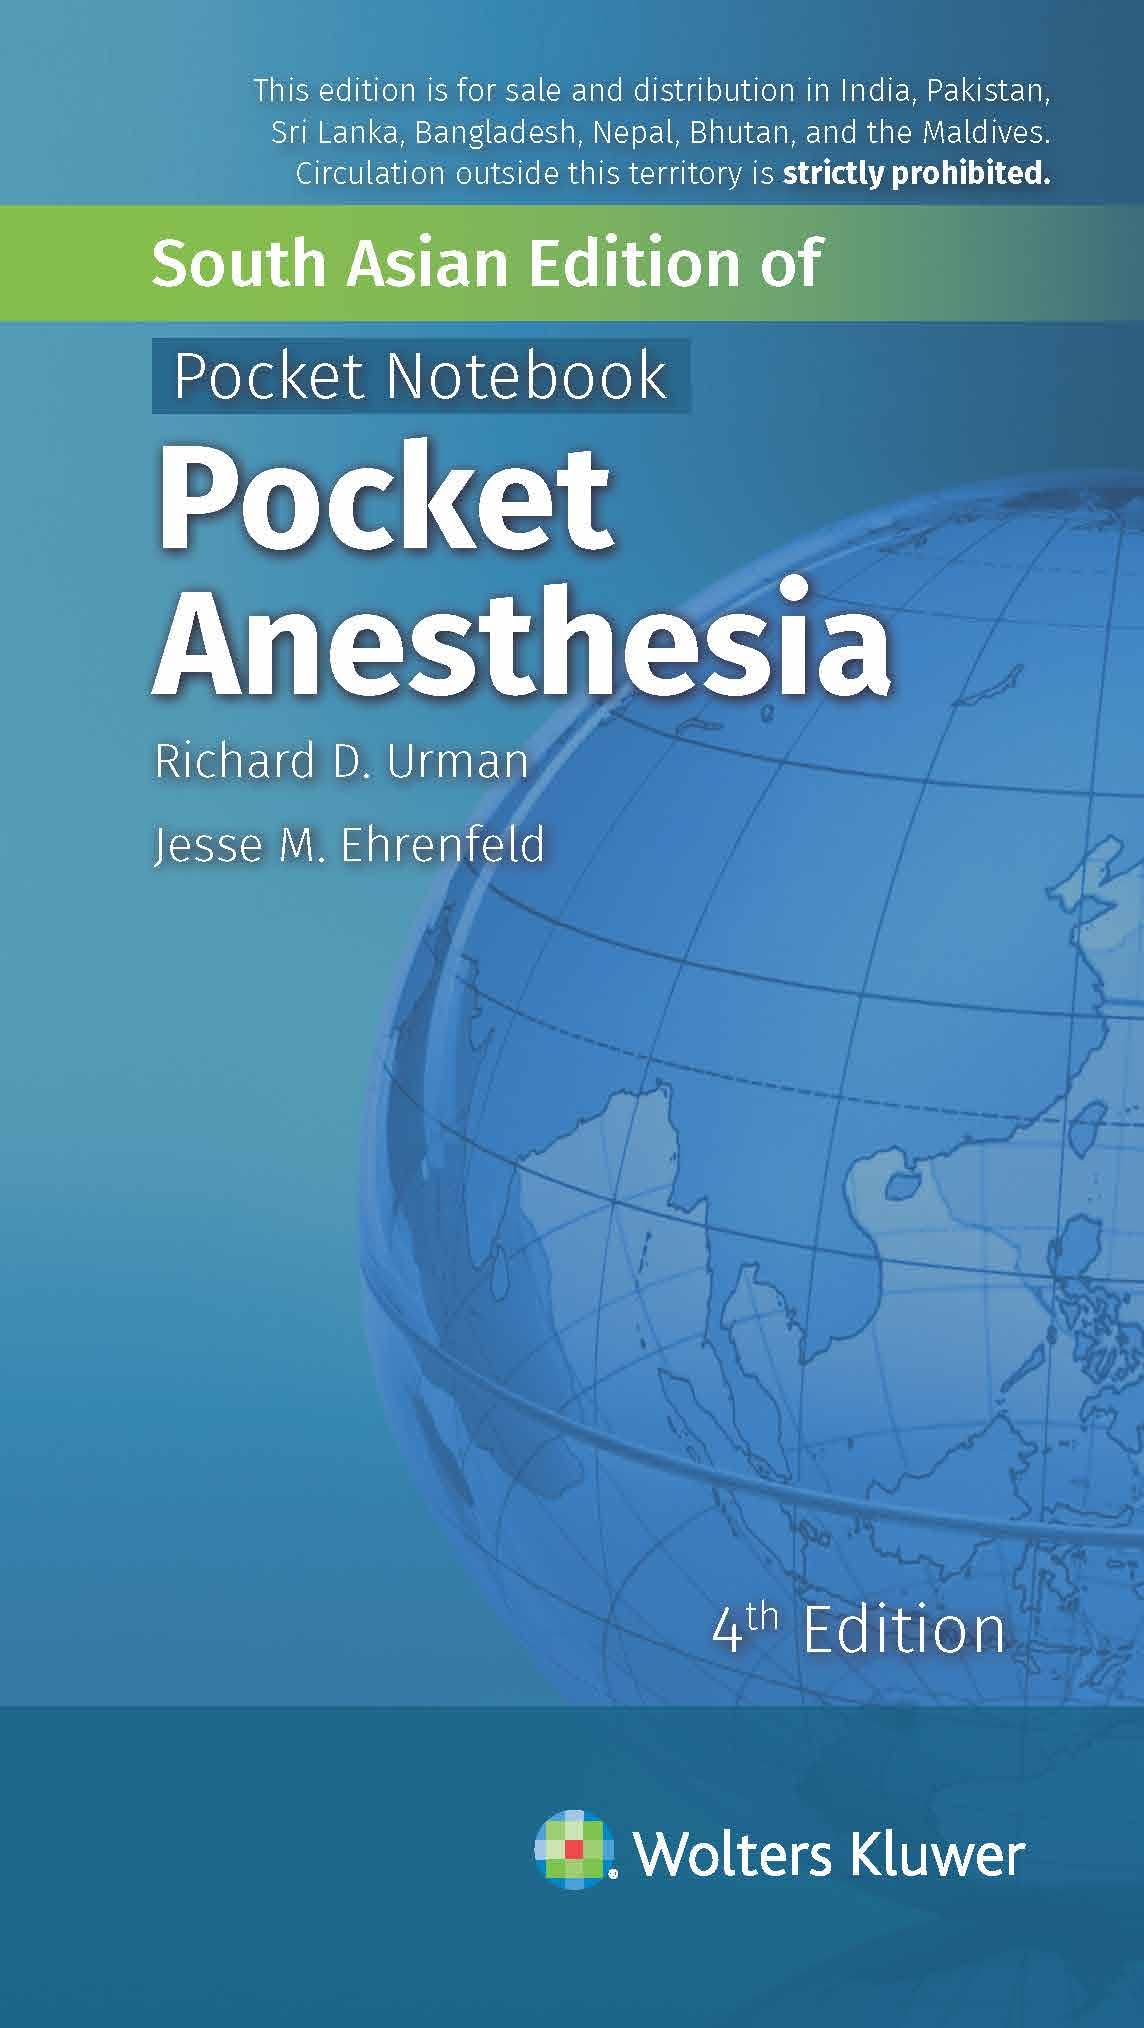 Pocket Anesthesia, 4th edition